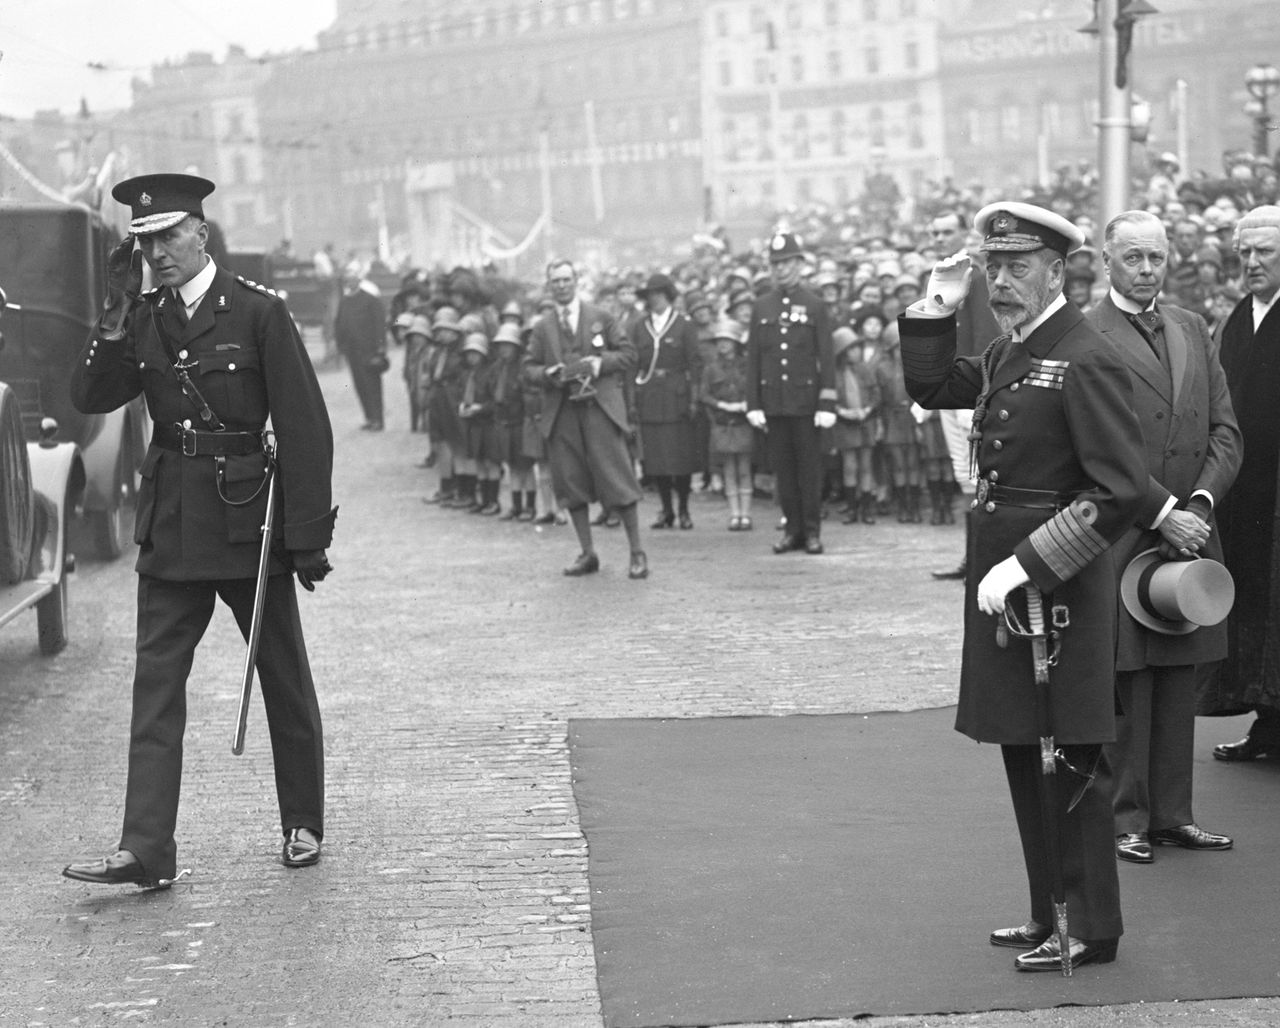 King George V opens the Gladstone Dock at Liverpool in 1913. Liverpool was a major slave trading port. Six years later, riots broke out in the city and Charles Wotten was killed by a white mob.